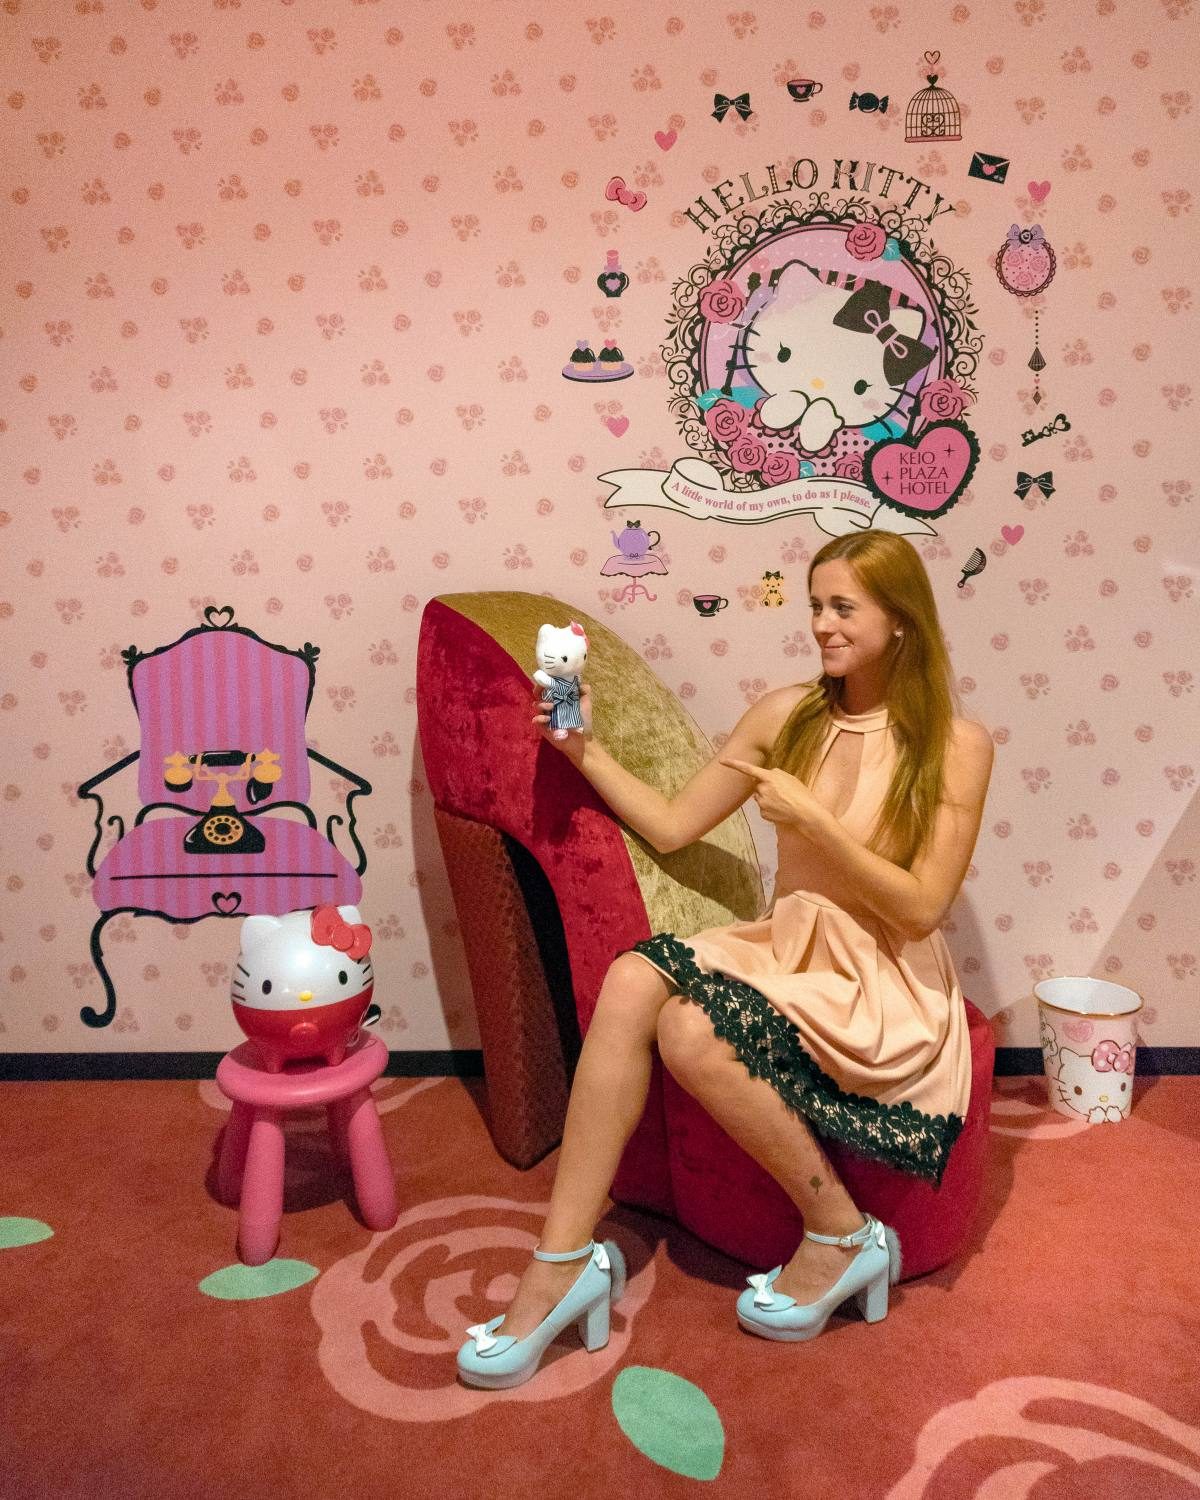 Posing with Hello Kitty decorations in a playful Tokyo theme room.

